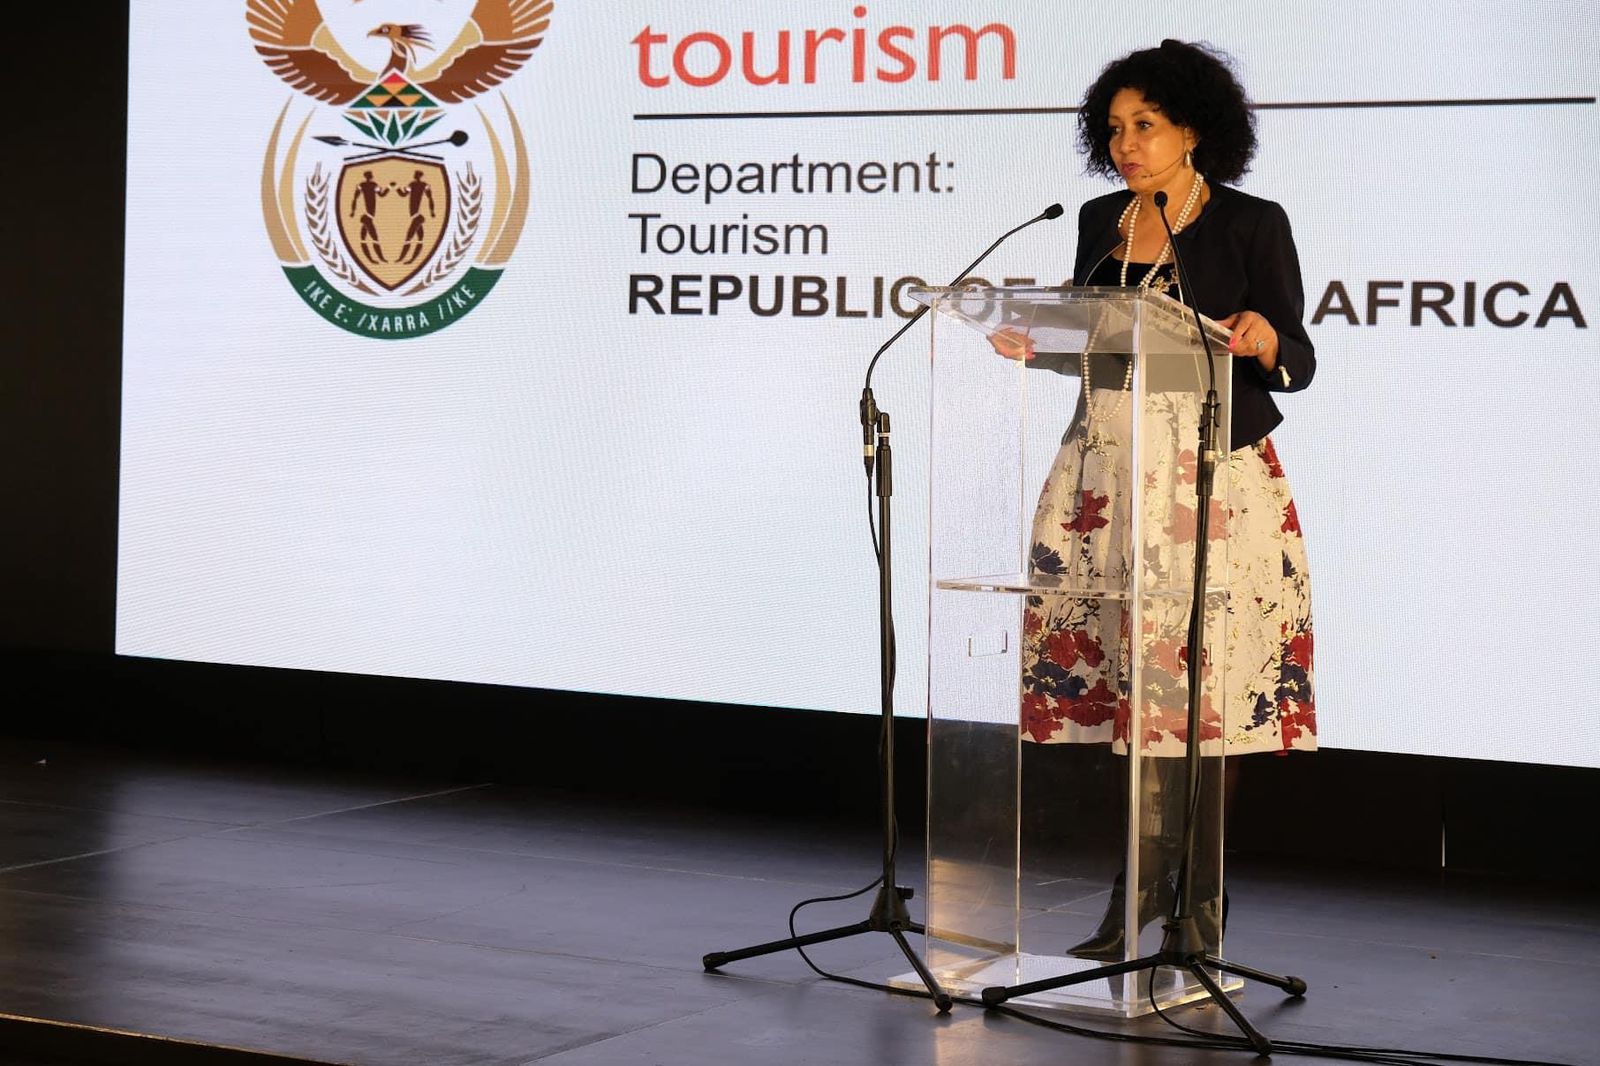 Speech by LN Sisulu, Minister of Tourism on the occasion of the Tourism Month launch, Ikhwa ttu, Western Cape